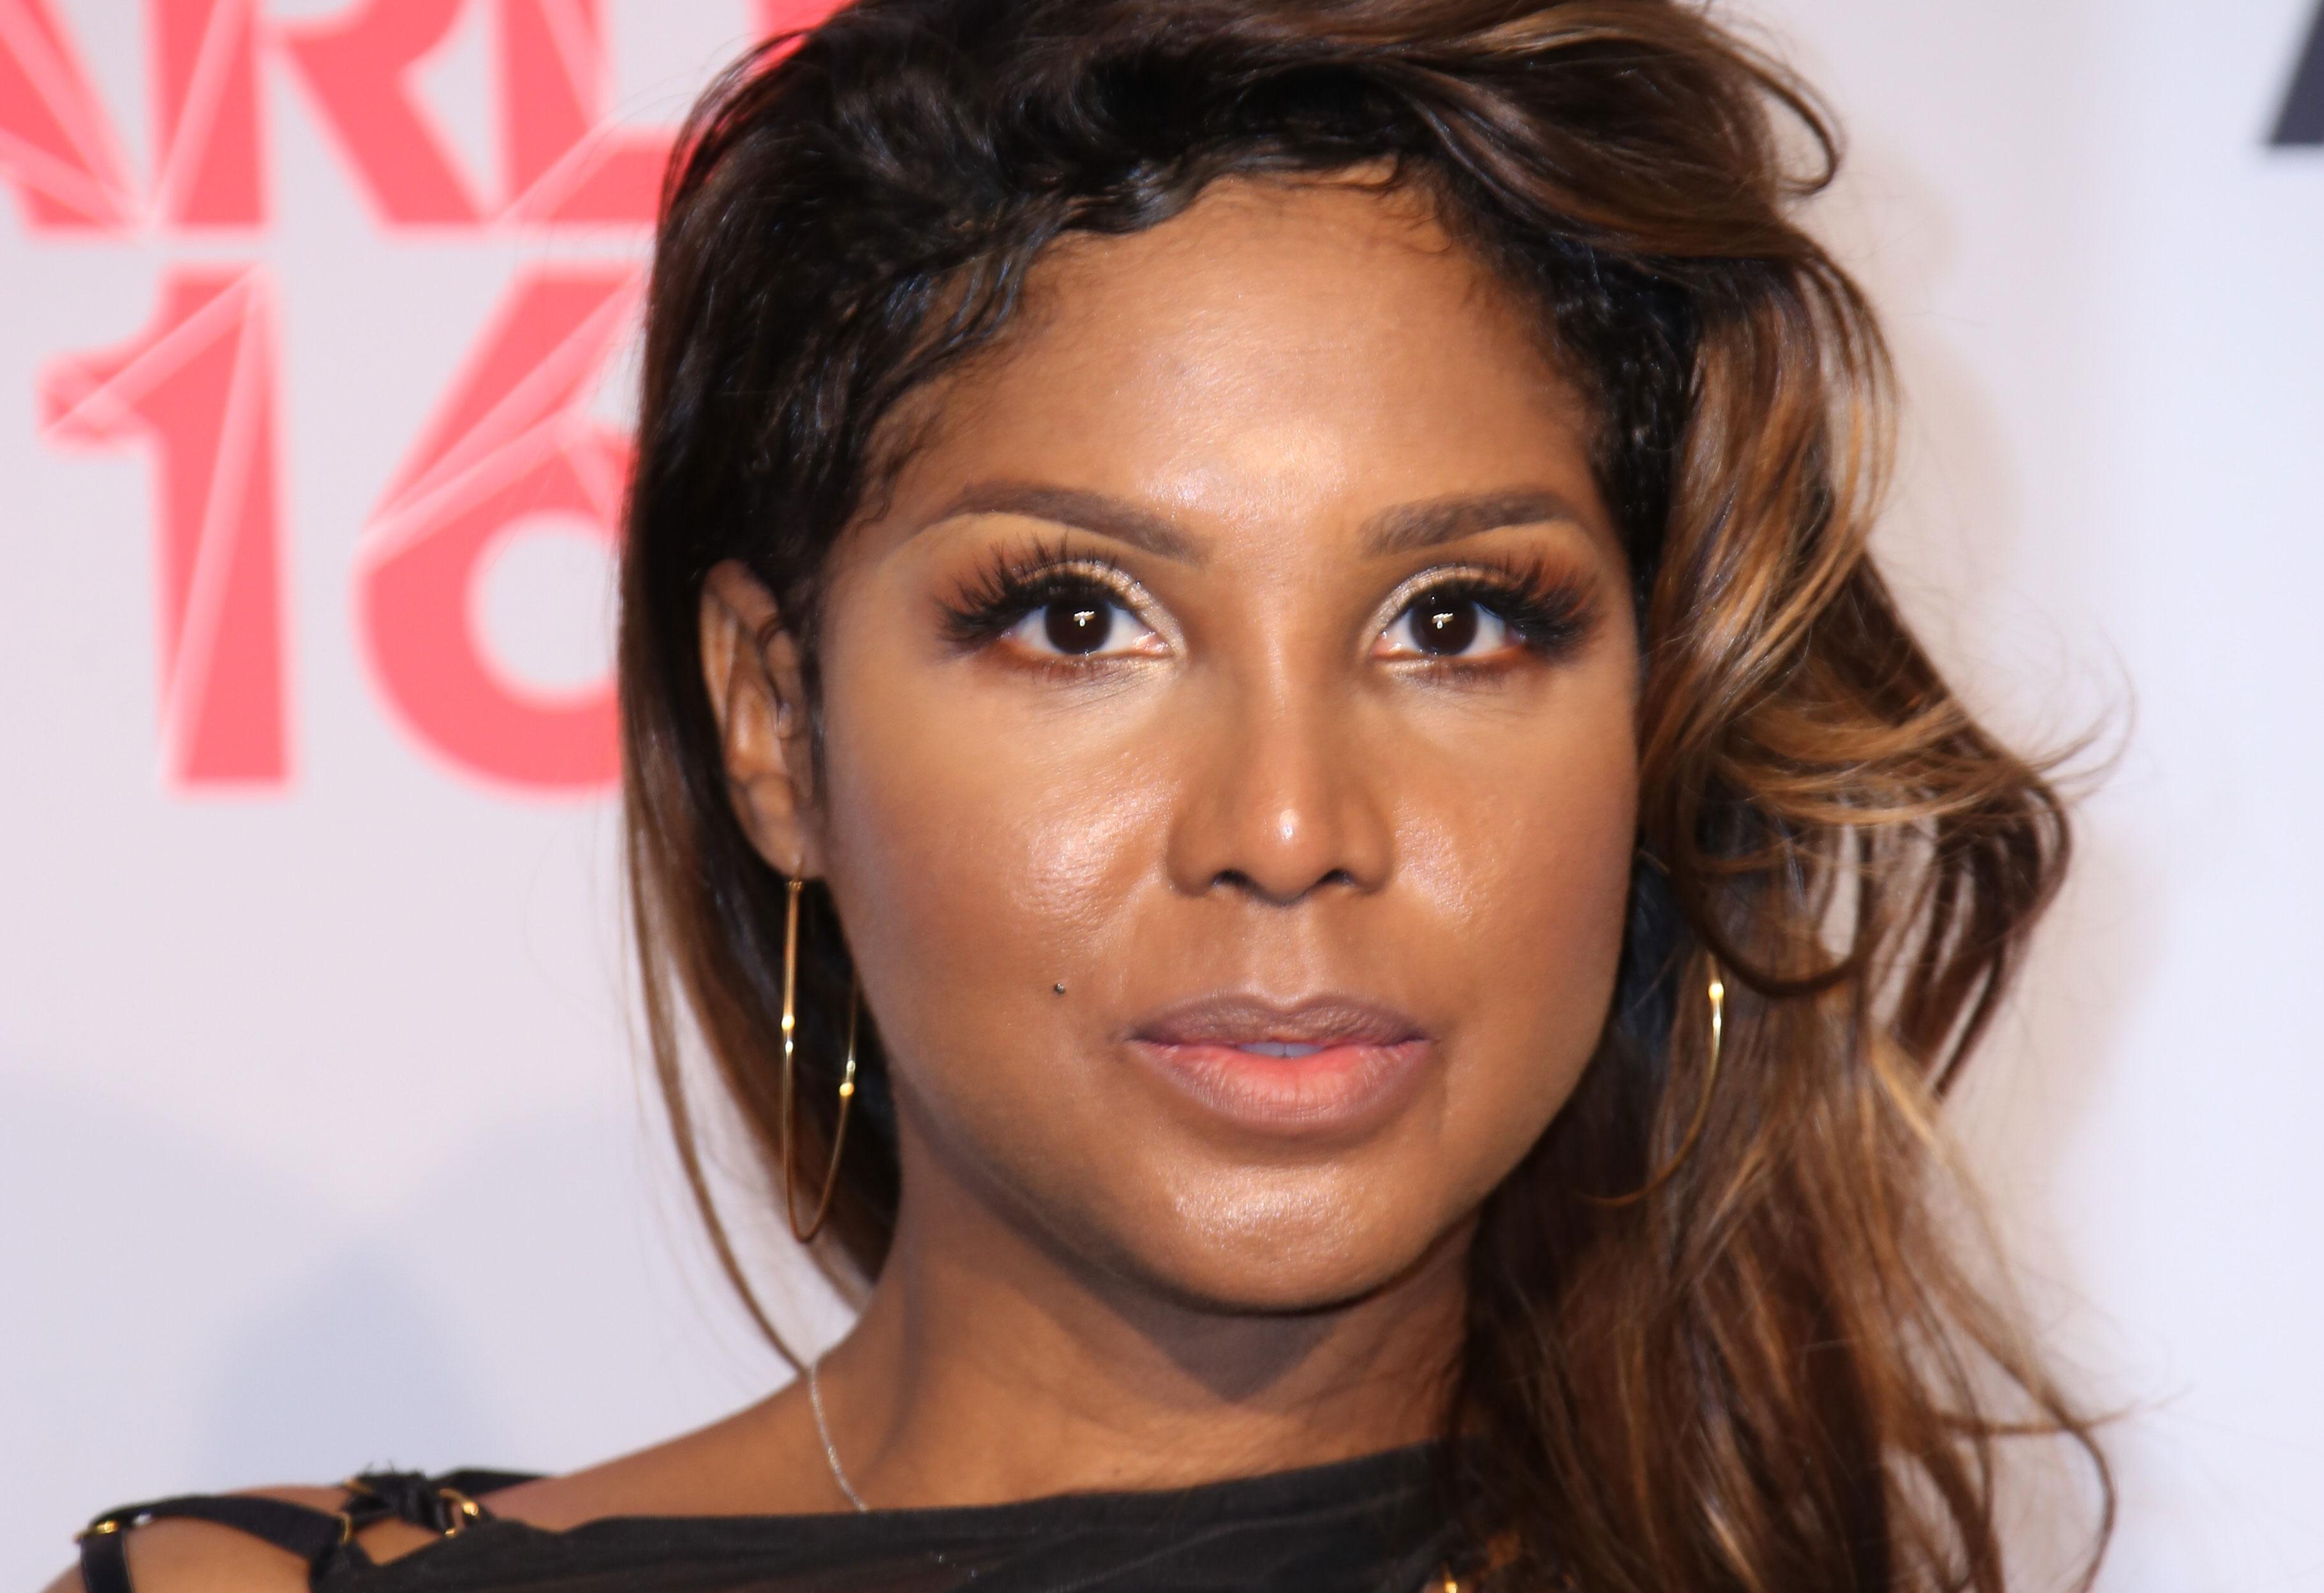 Toni Braxton In Serious Condition After Being Rushed To Hospital